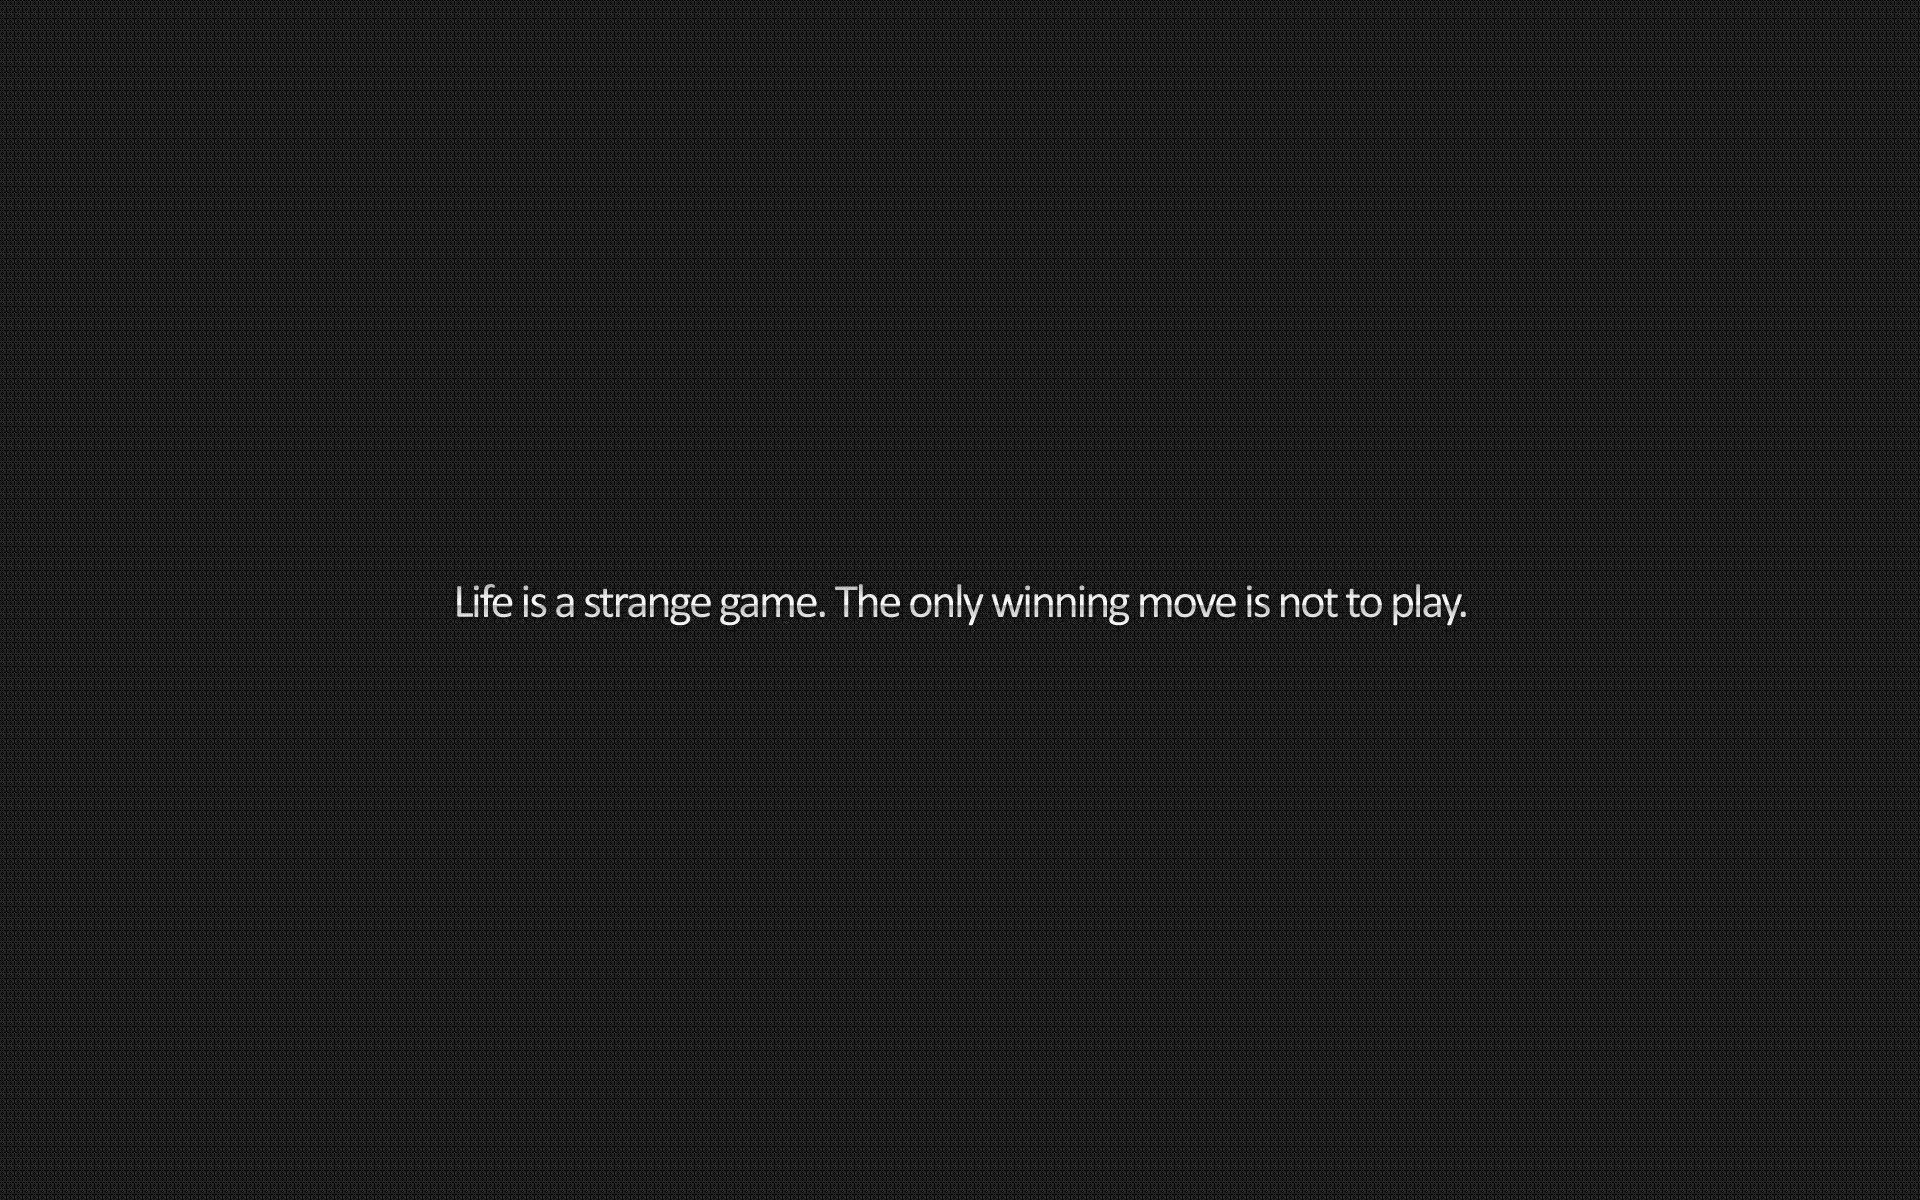 tumblr wallpapers quotes about life